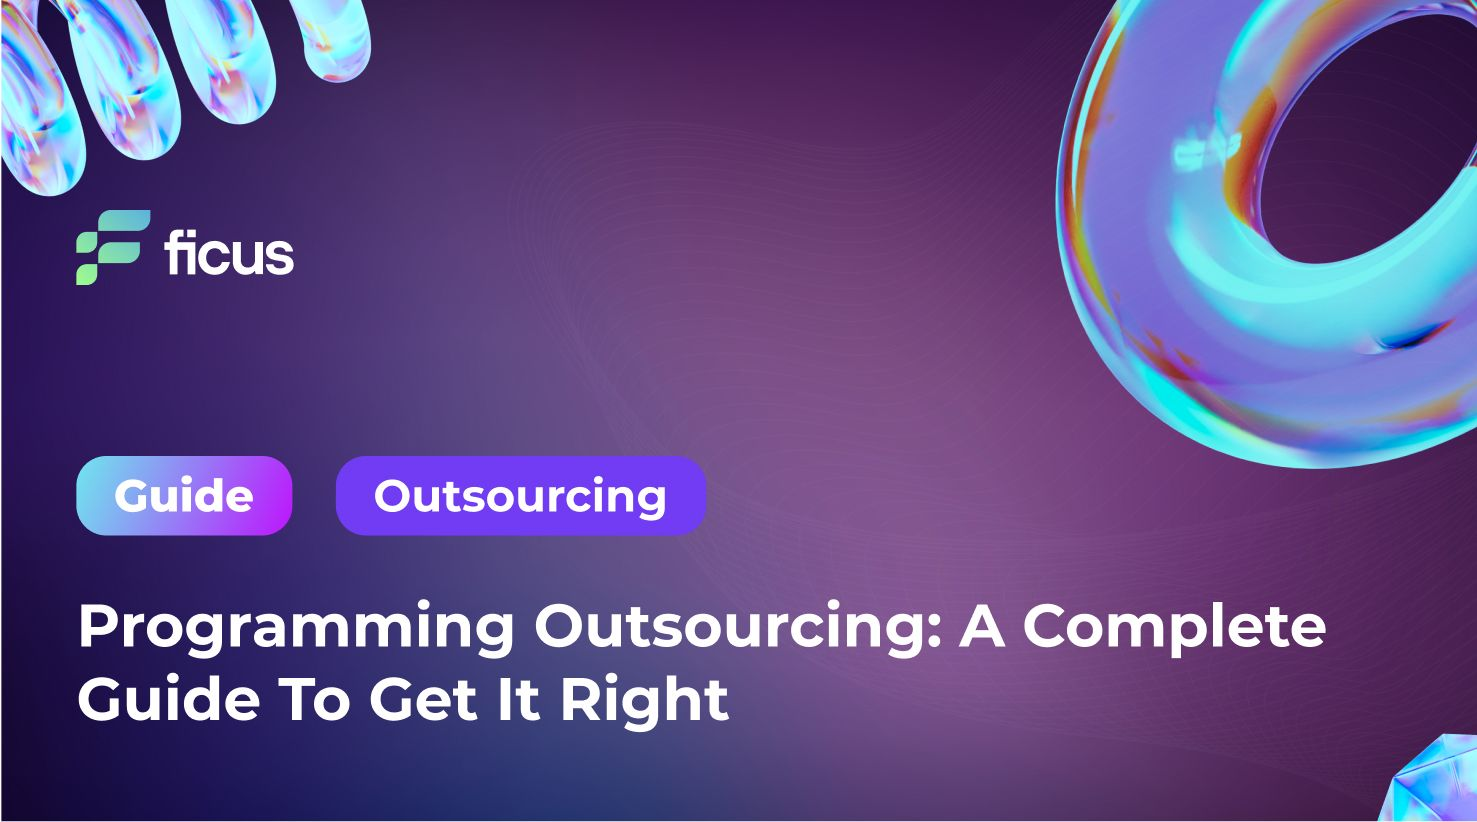 Programming Outsourcing: A Complete Guide To Get It Right